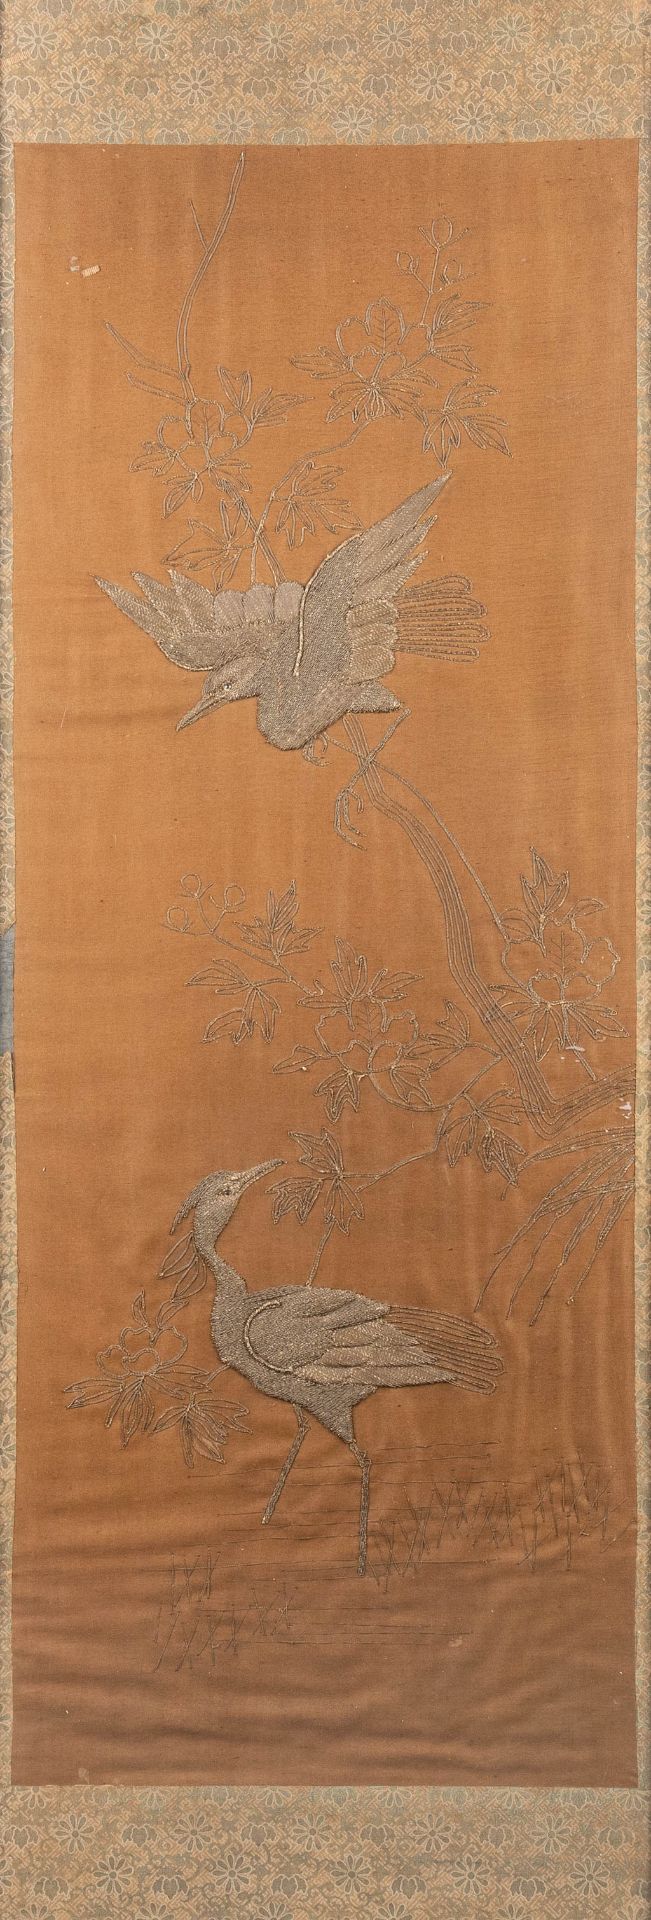 A Chinese embroidery with images of two birds, 19th C. (130 x 50 cm)